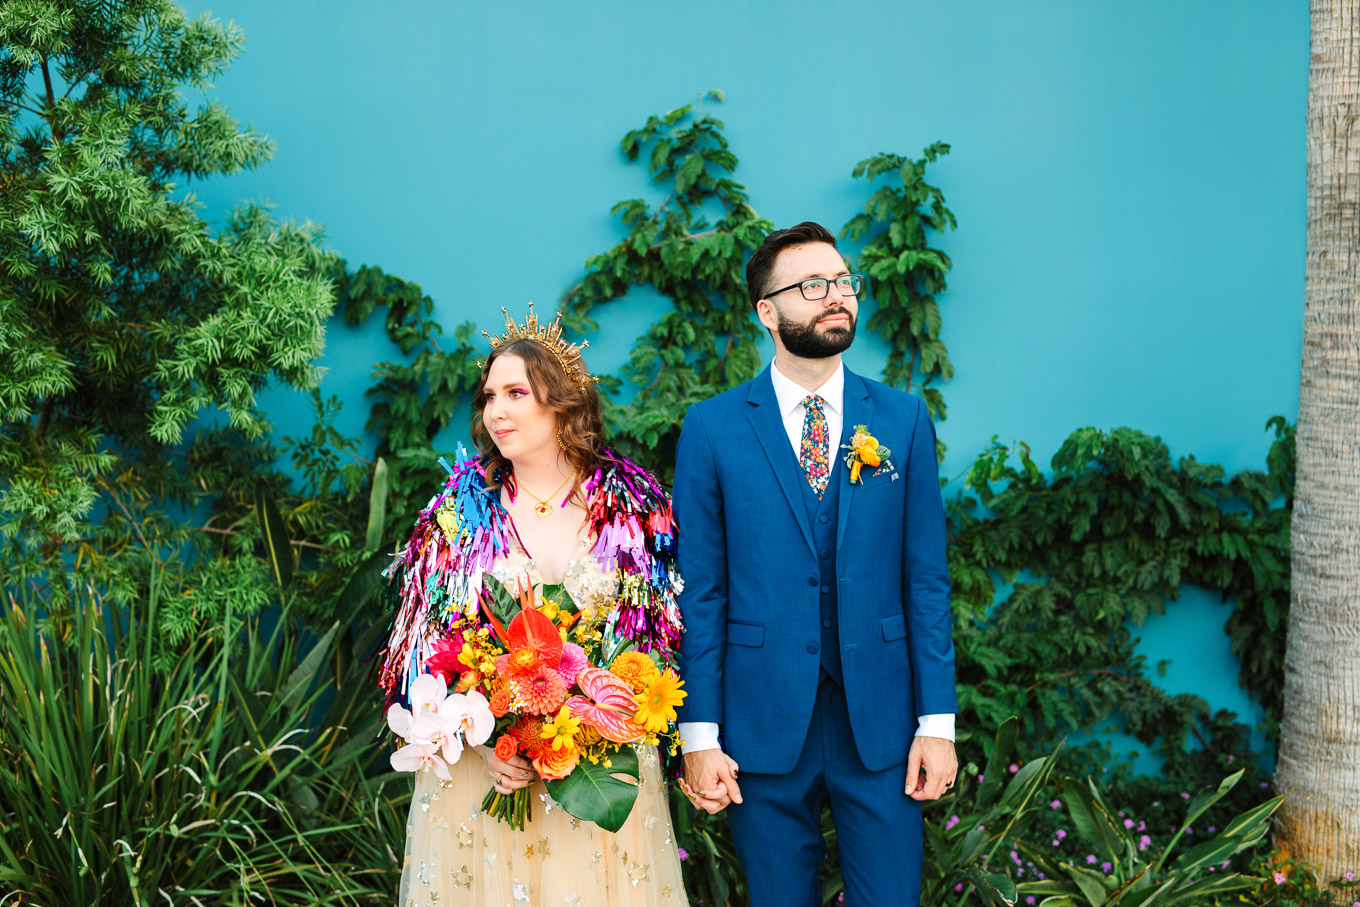 Bride and groom in front of Valentine | Colorful Downtown Los Angeles Valentine Wedding | Los Angeles wedding photographer | #losangeleswedding #colorfulwedding #DTLA #valentinedtla   Source: Mary Costa Photography | Los Angeles